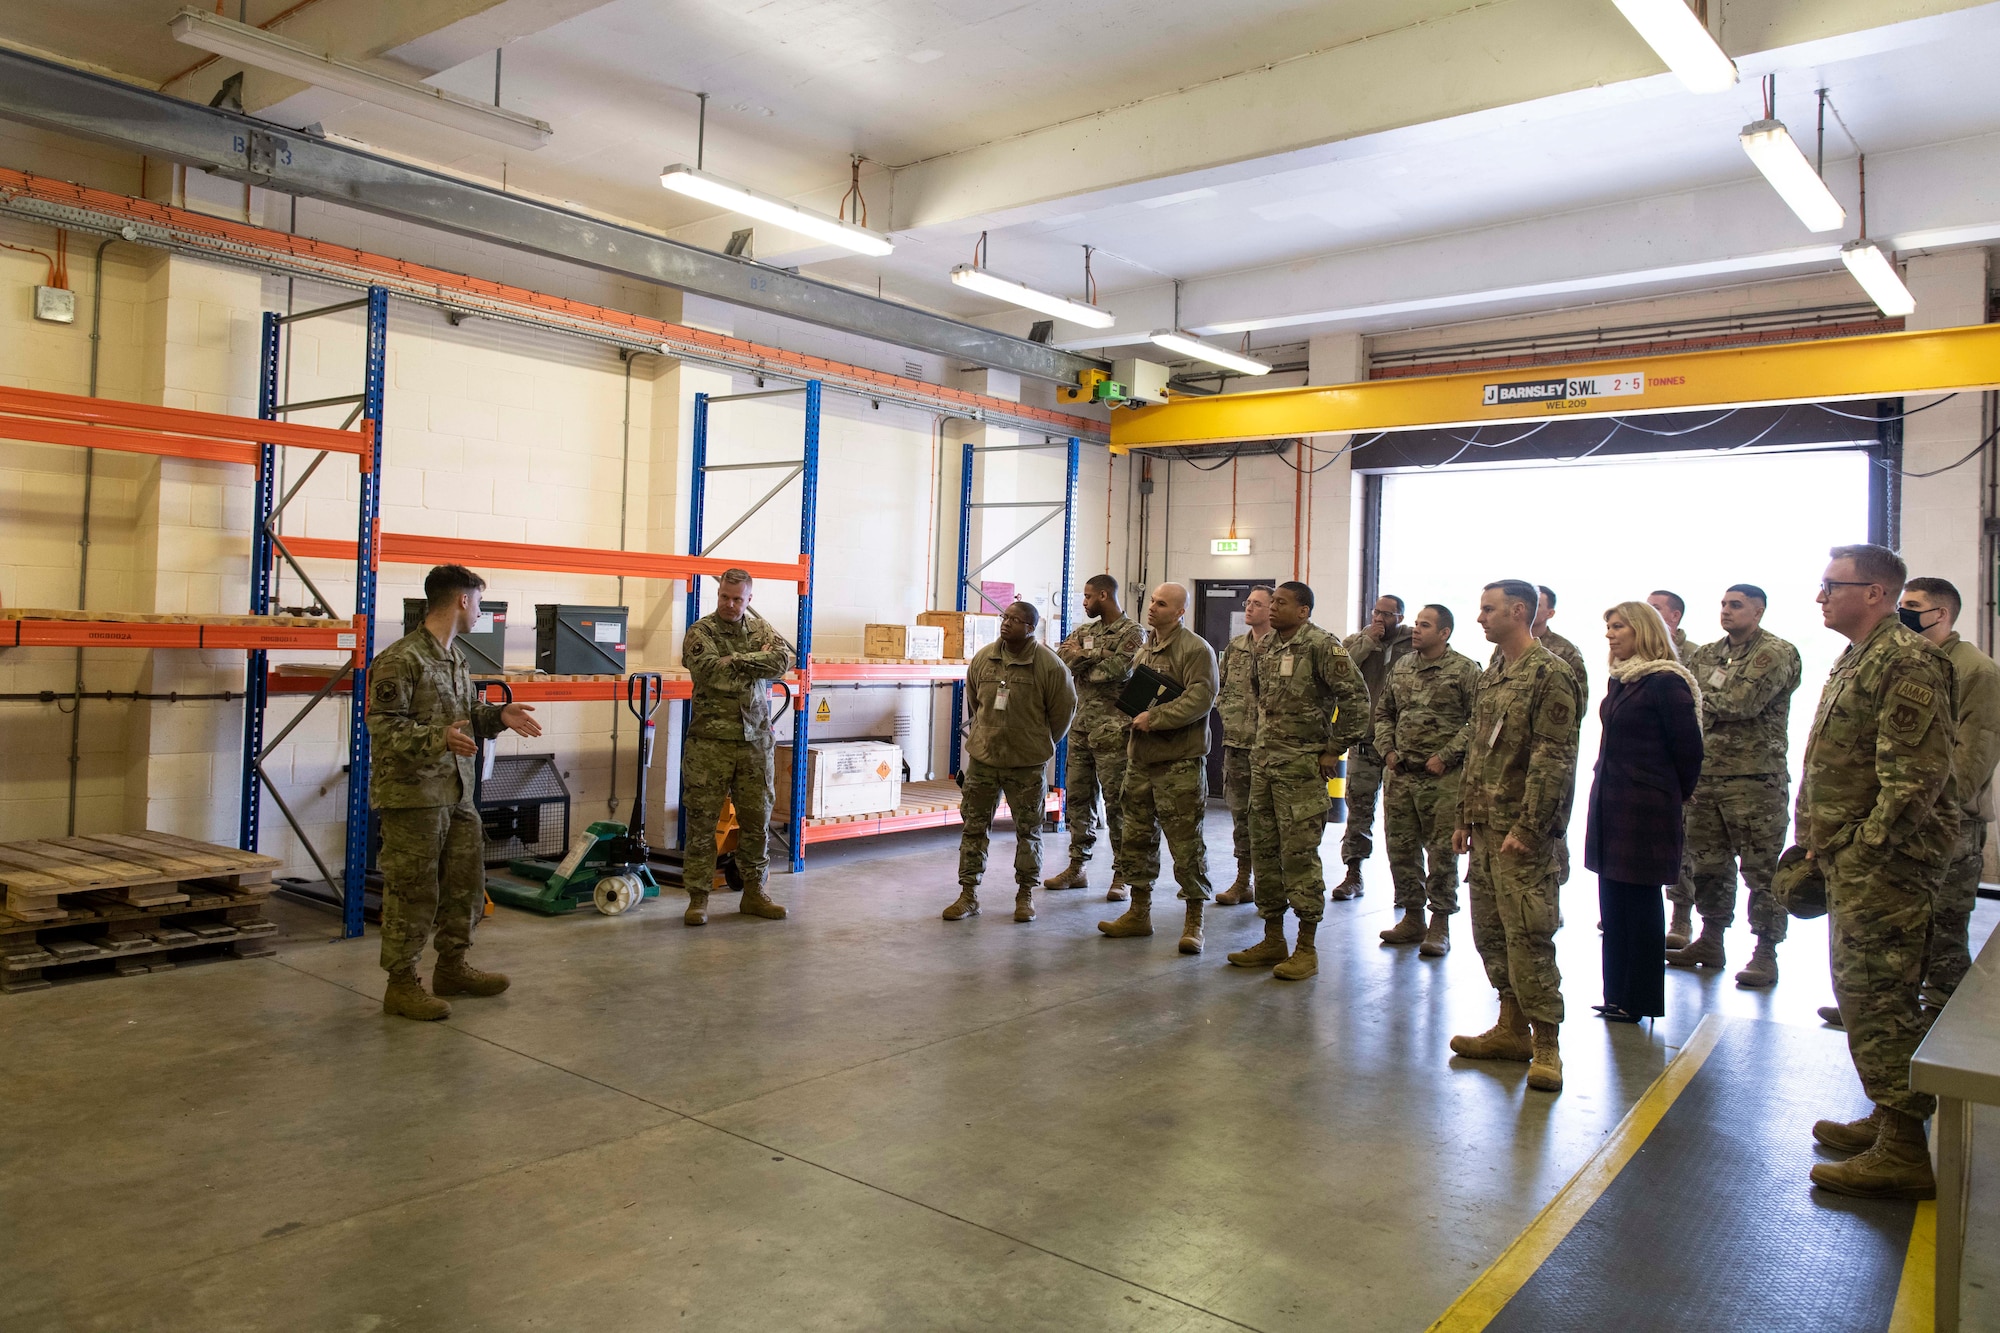 U.S. Air Force Senior Airman Nicholas Risley, left, 420th Munitions Squadron munitions inspector, briefs the 501st Combat Support Wing Readiness Working Group with the munitions inspection area at Royal Air Force Welford, England, April 27, 2022. The group attended an immersion tour at RAF Welford and RAF Fairford to orient themselves with the missions these bases provide. (U.S. Air Force photo by Senior Airman Jennifer Zima)